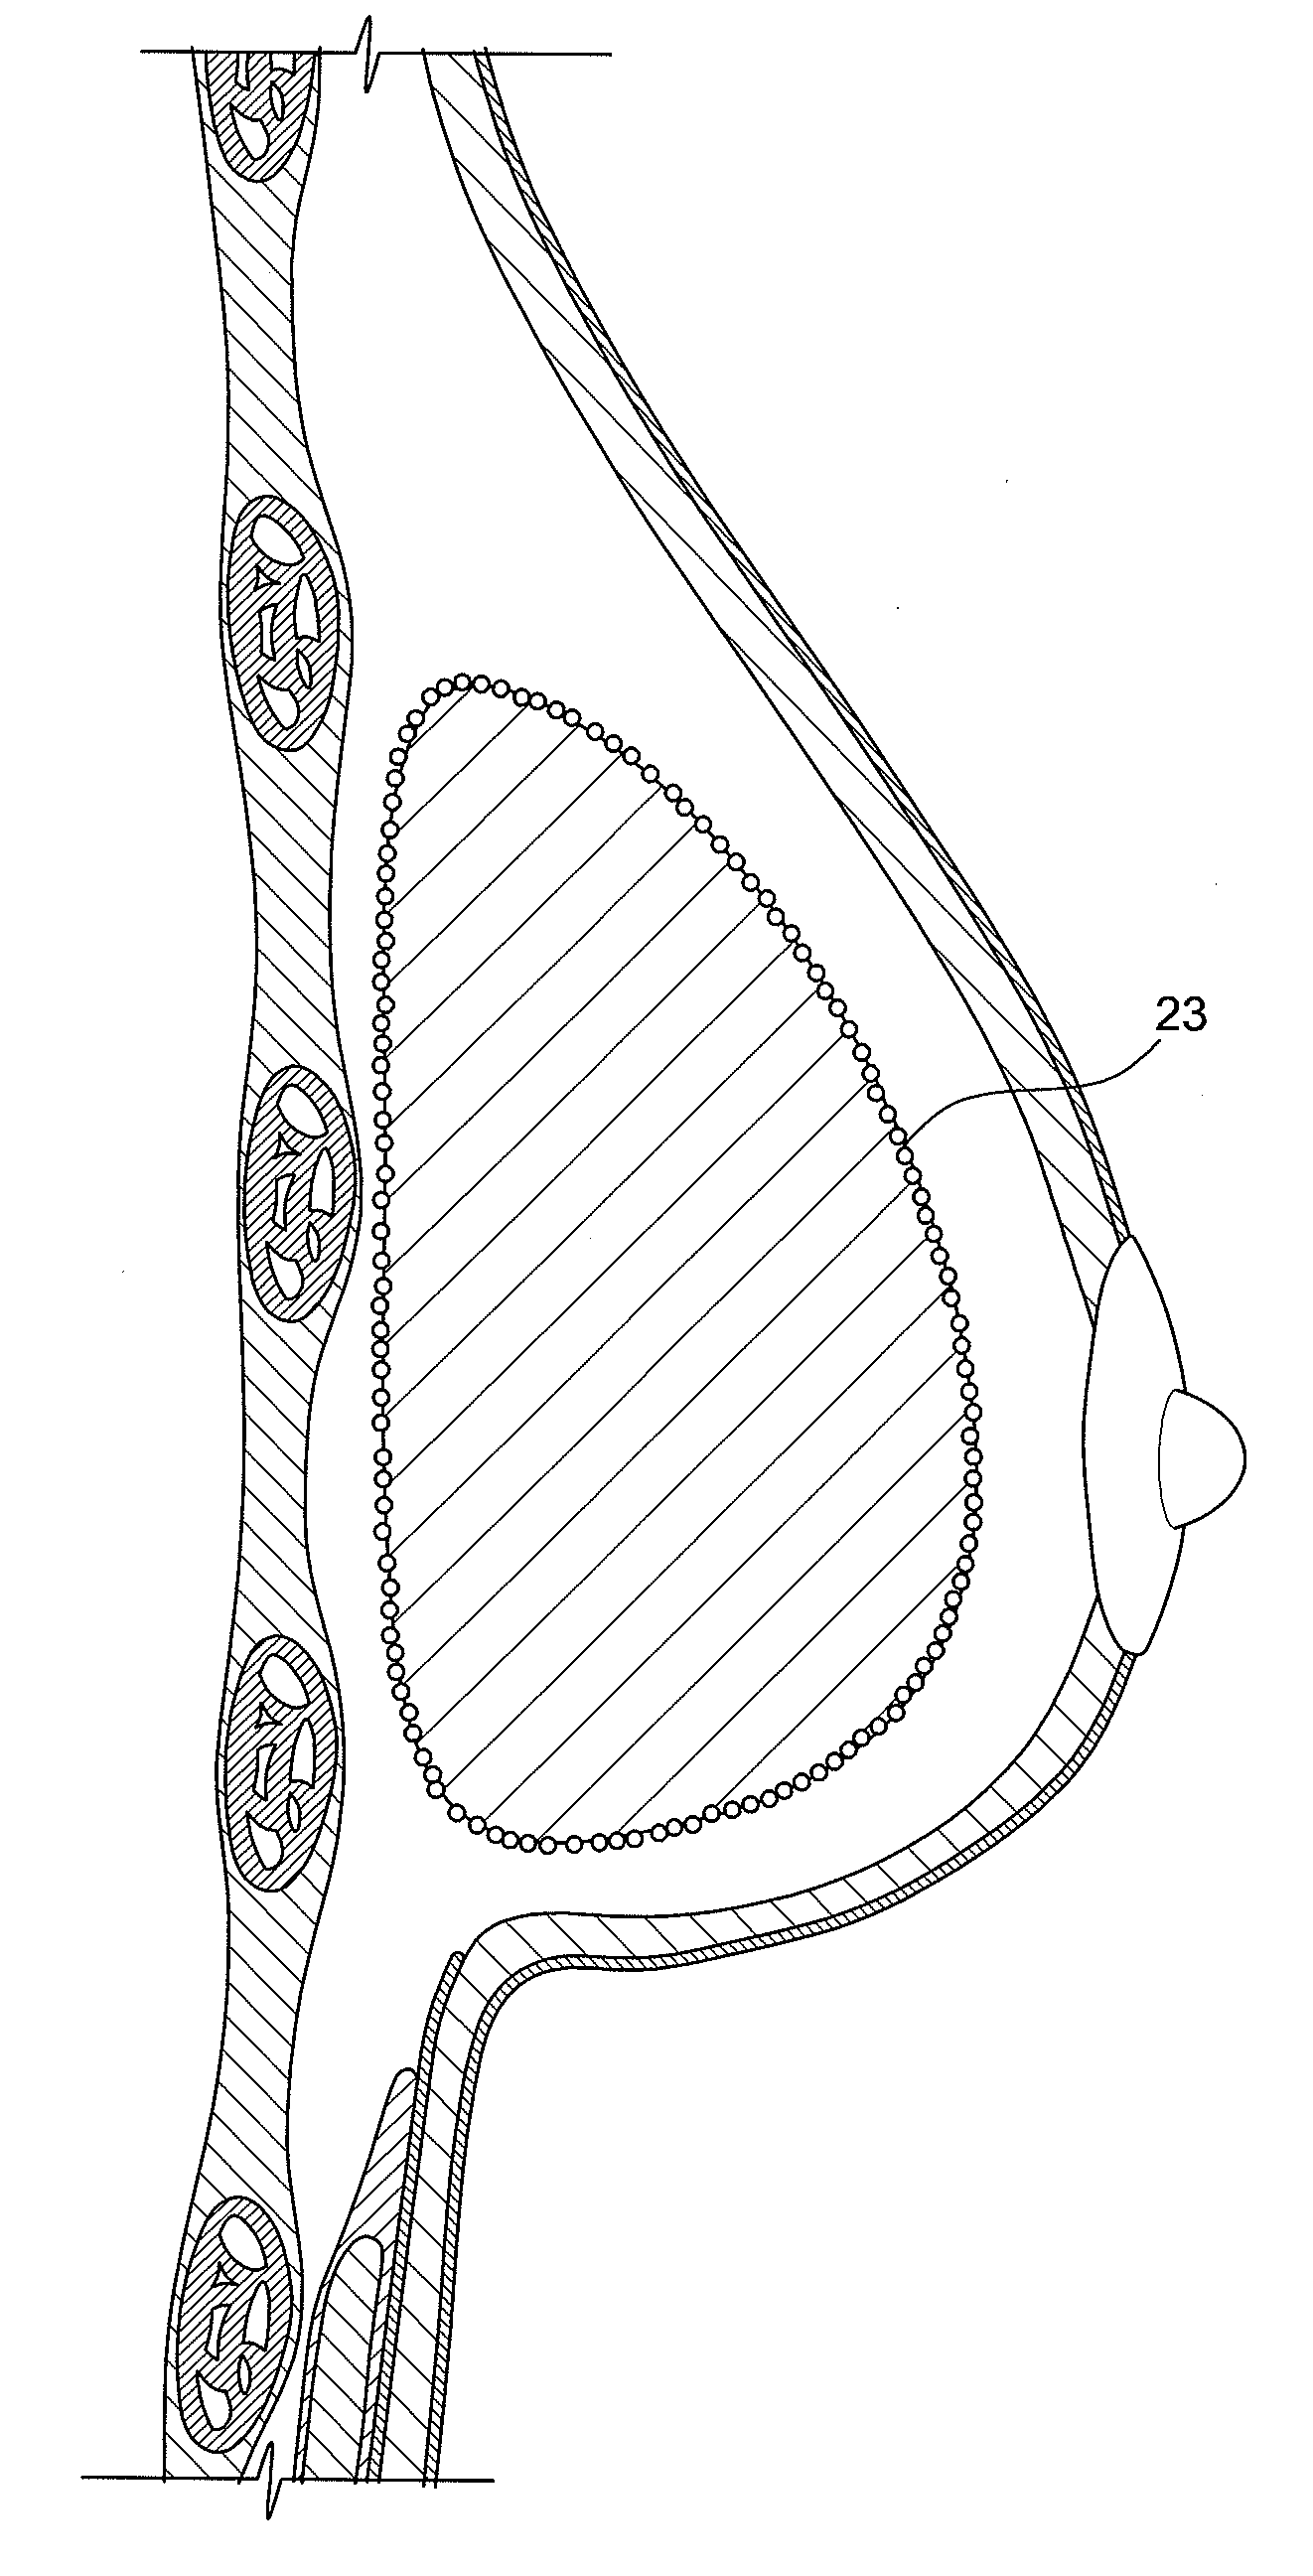 Method for texturing the surface of a synthetic implant